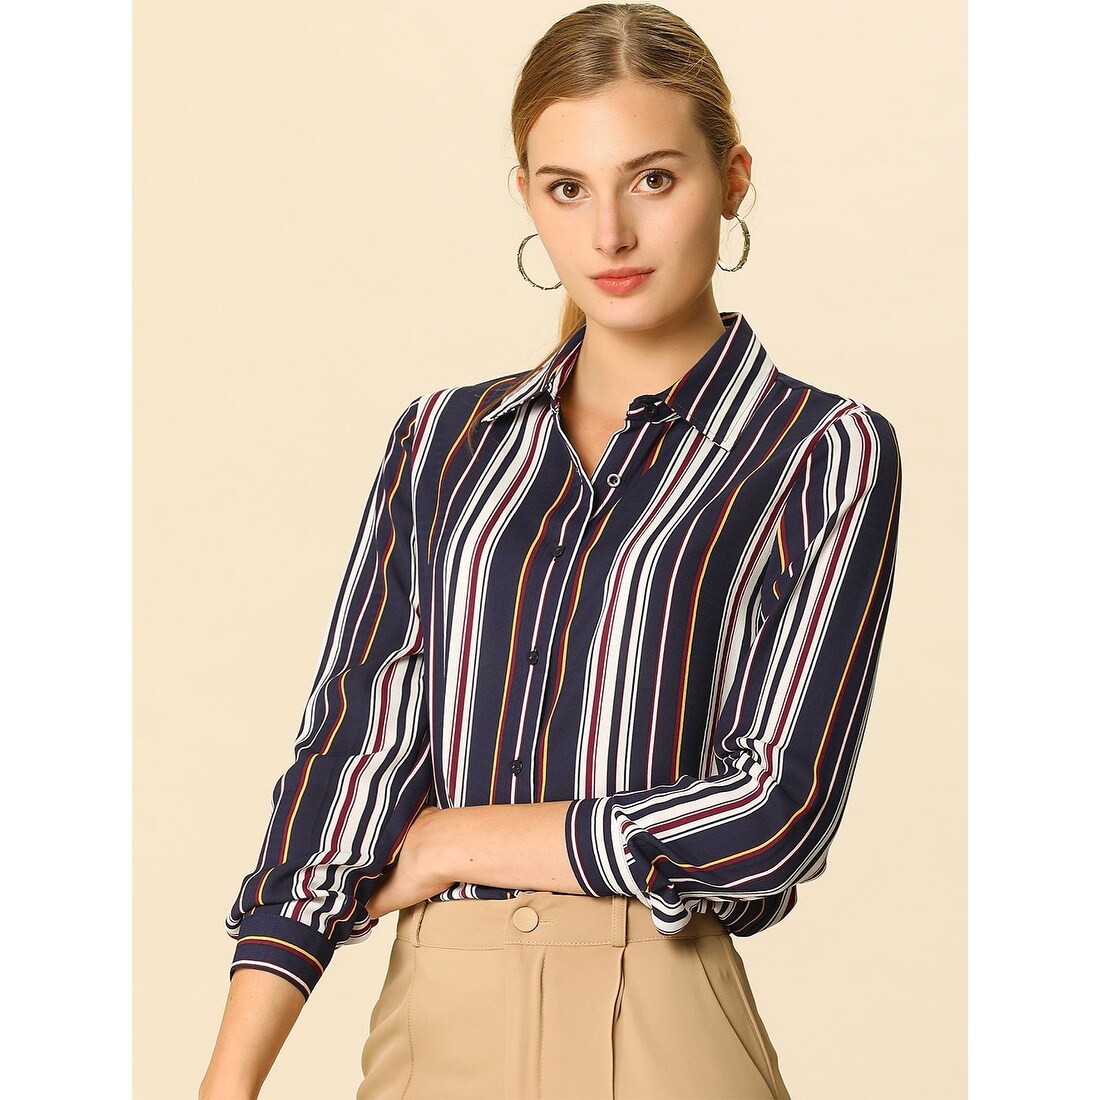 business casual striped shirt